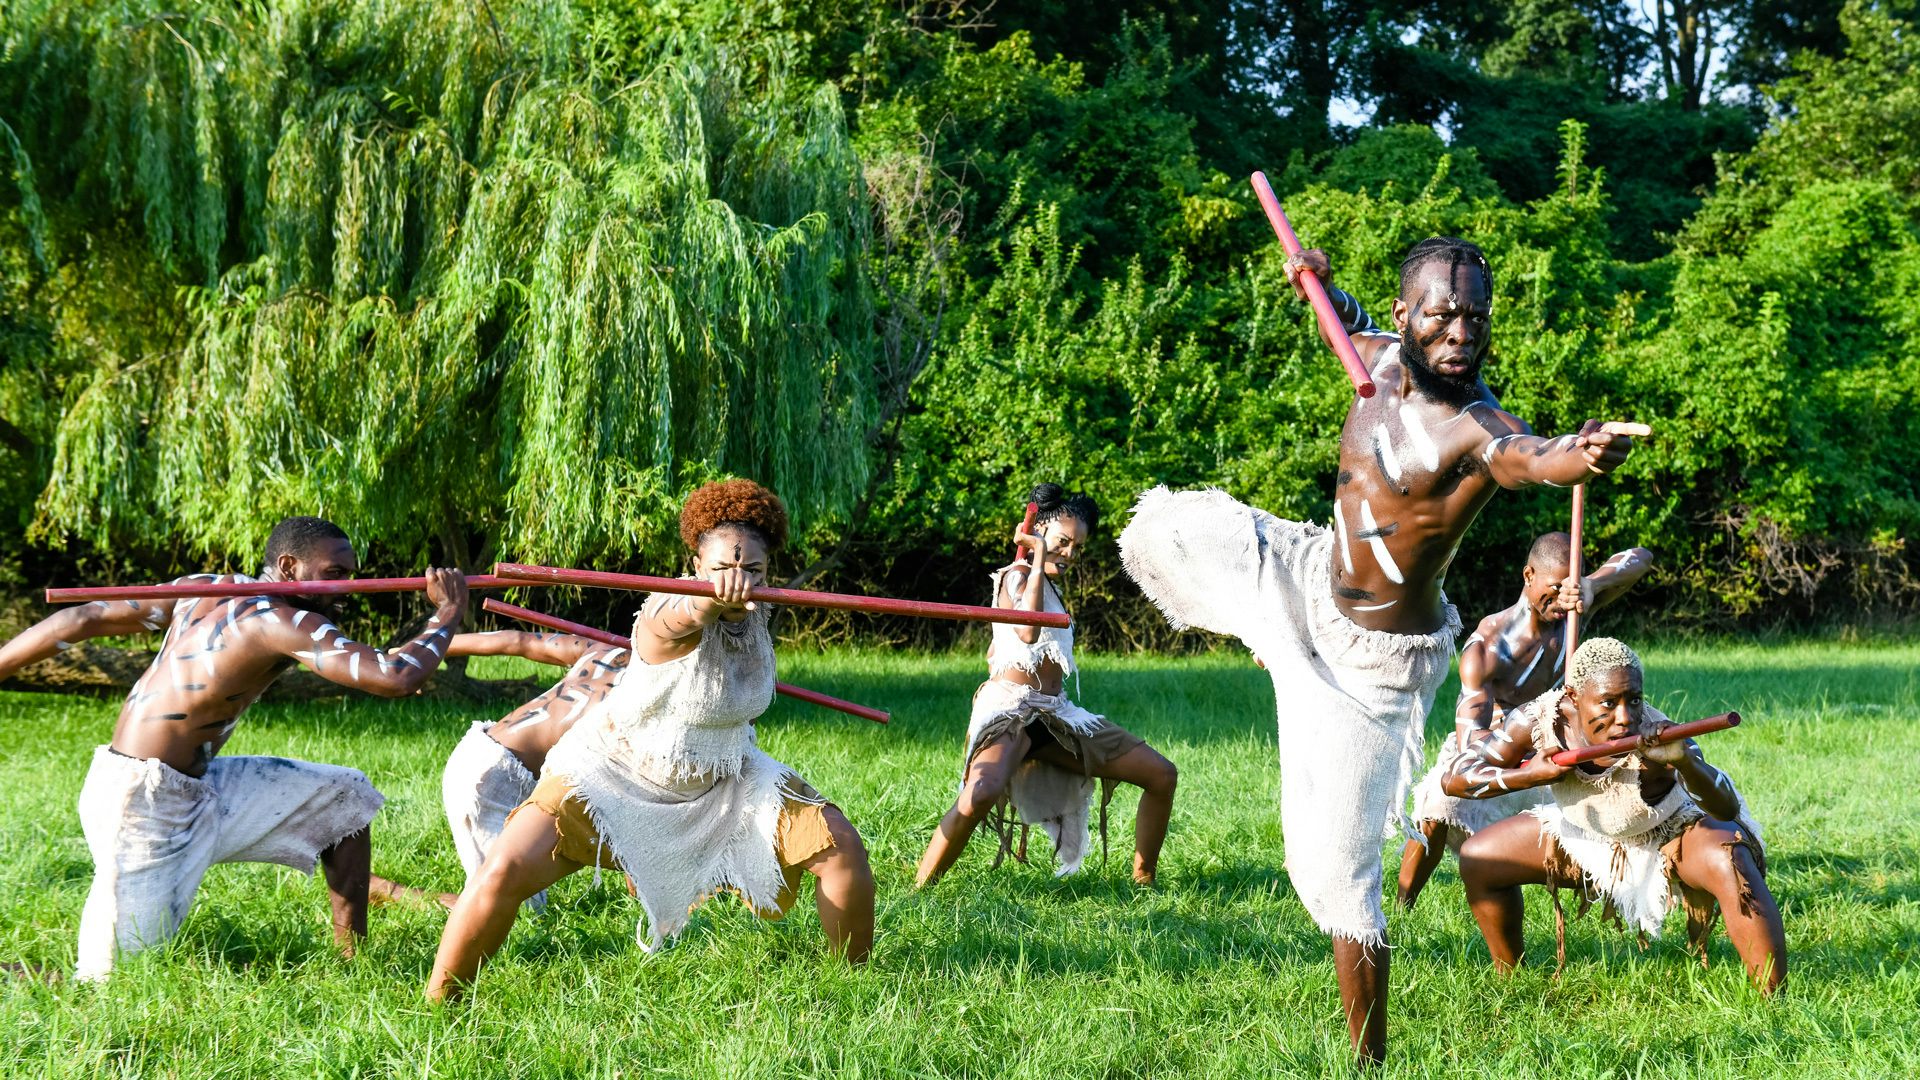 A male dancer holding a martial stick stands on one pointing. Behind, a group of six dancers crouch low to the grass.